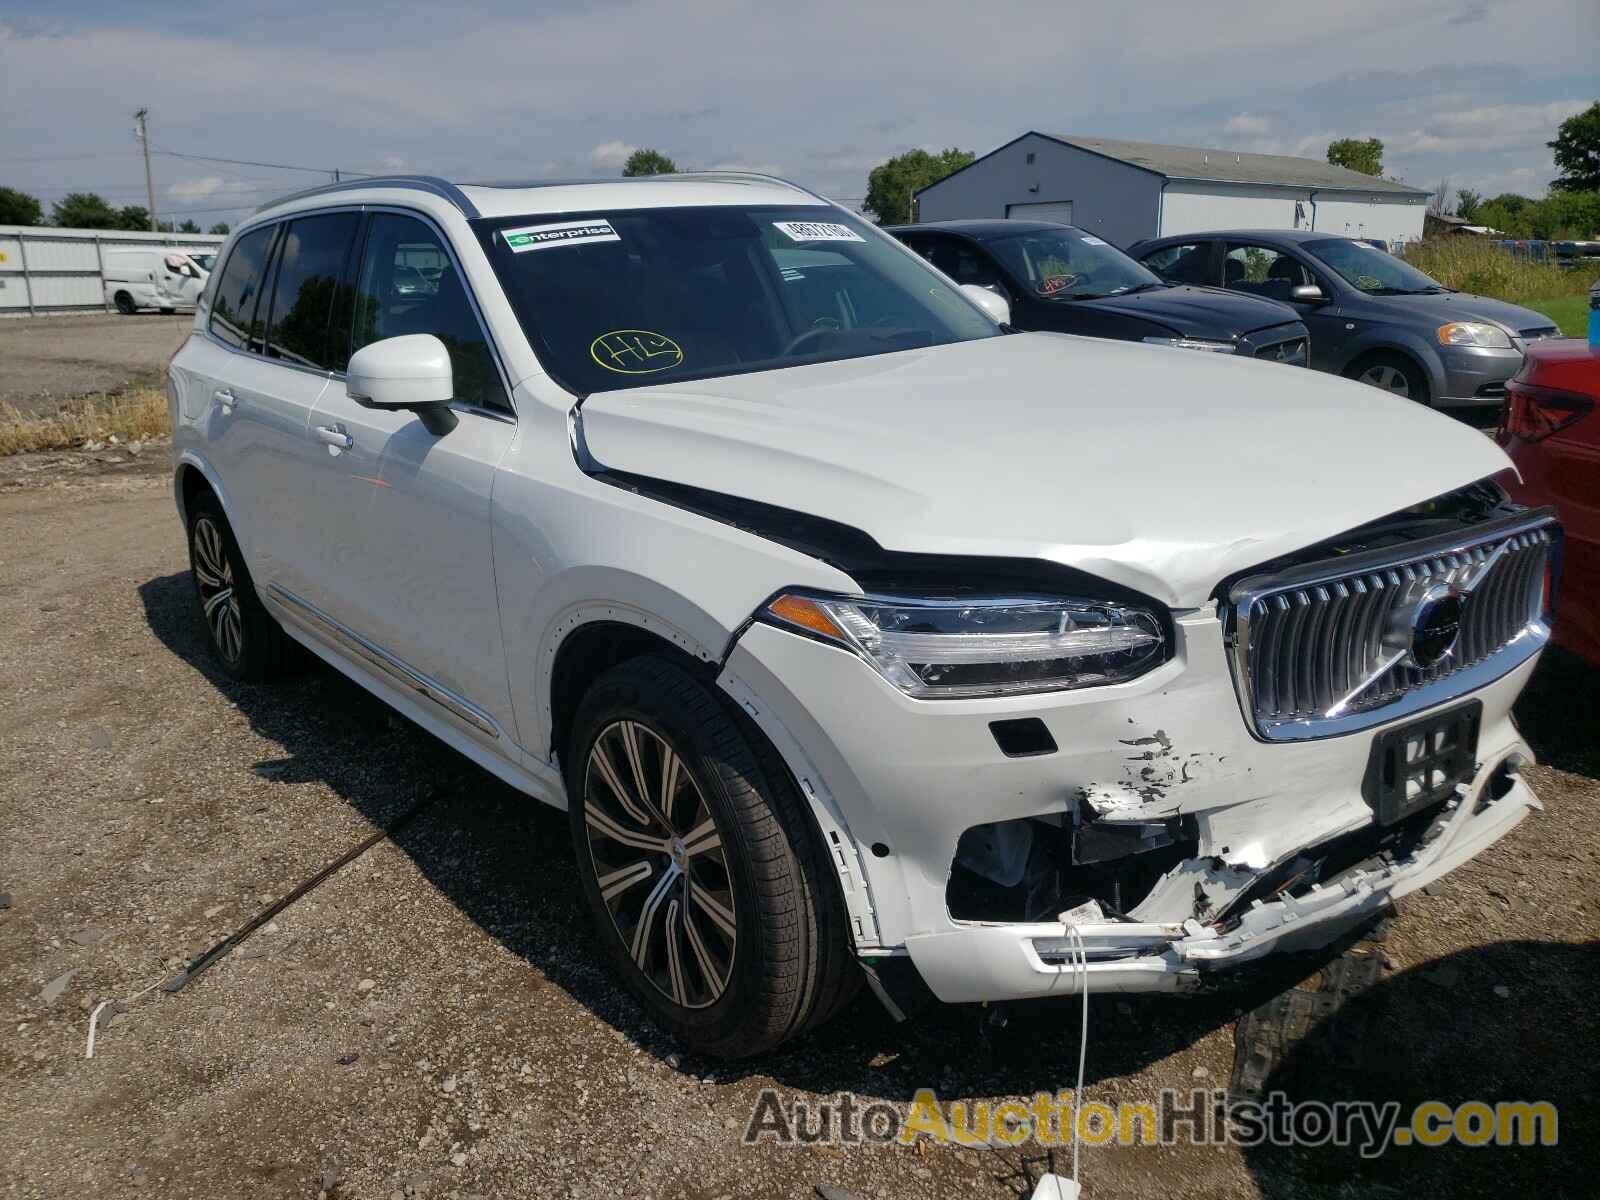 2020 VOLVO XC90 T6 IN T6 INSCRIPTION, YV4A22PL5L1599192